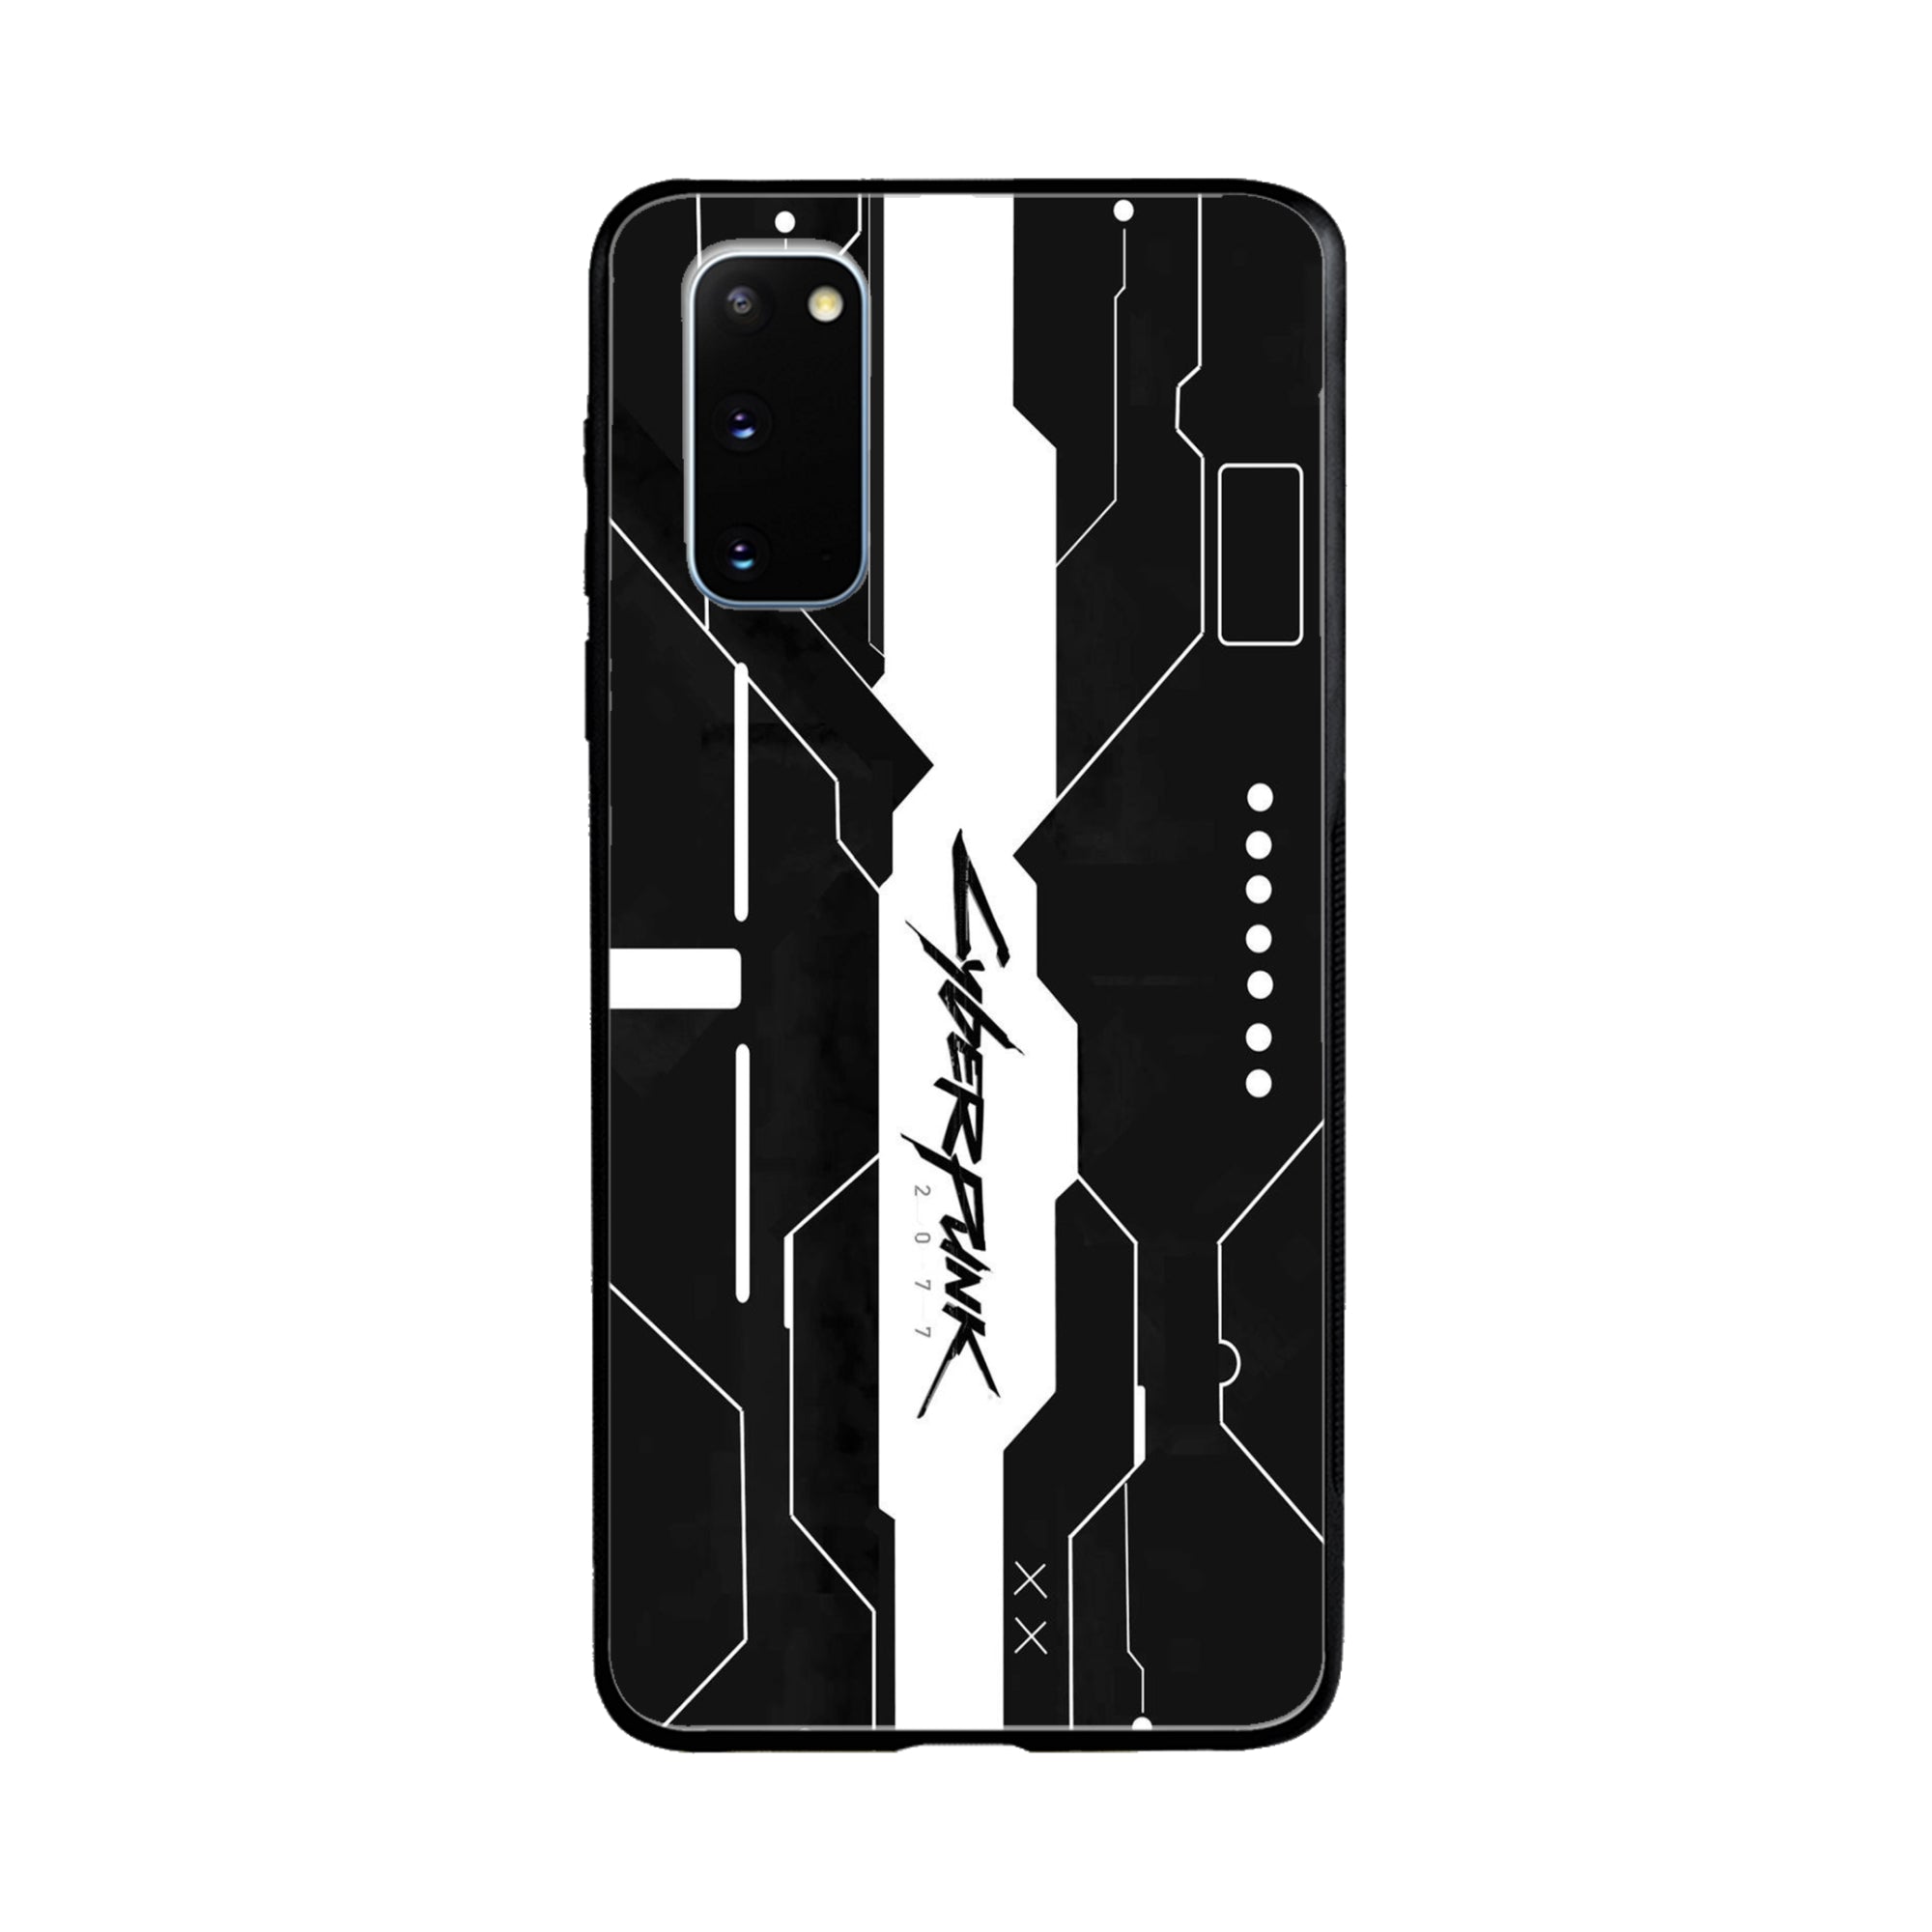 Buy Cyberpunk 2077 Art Metal-Silicon Back Mobile Phone Case/Cover For Samsung Galaxy S20 Online